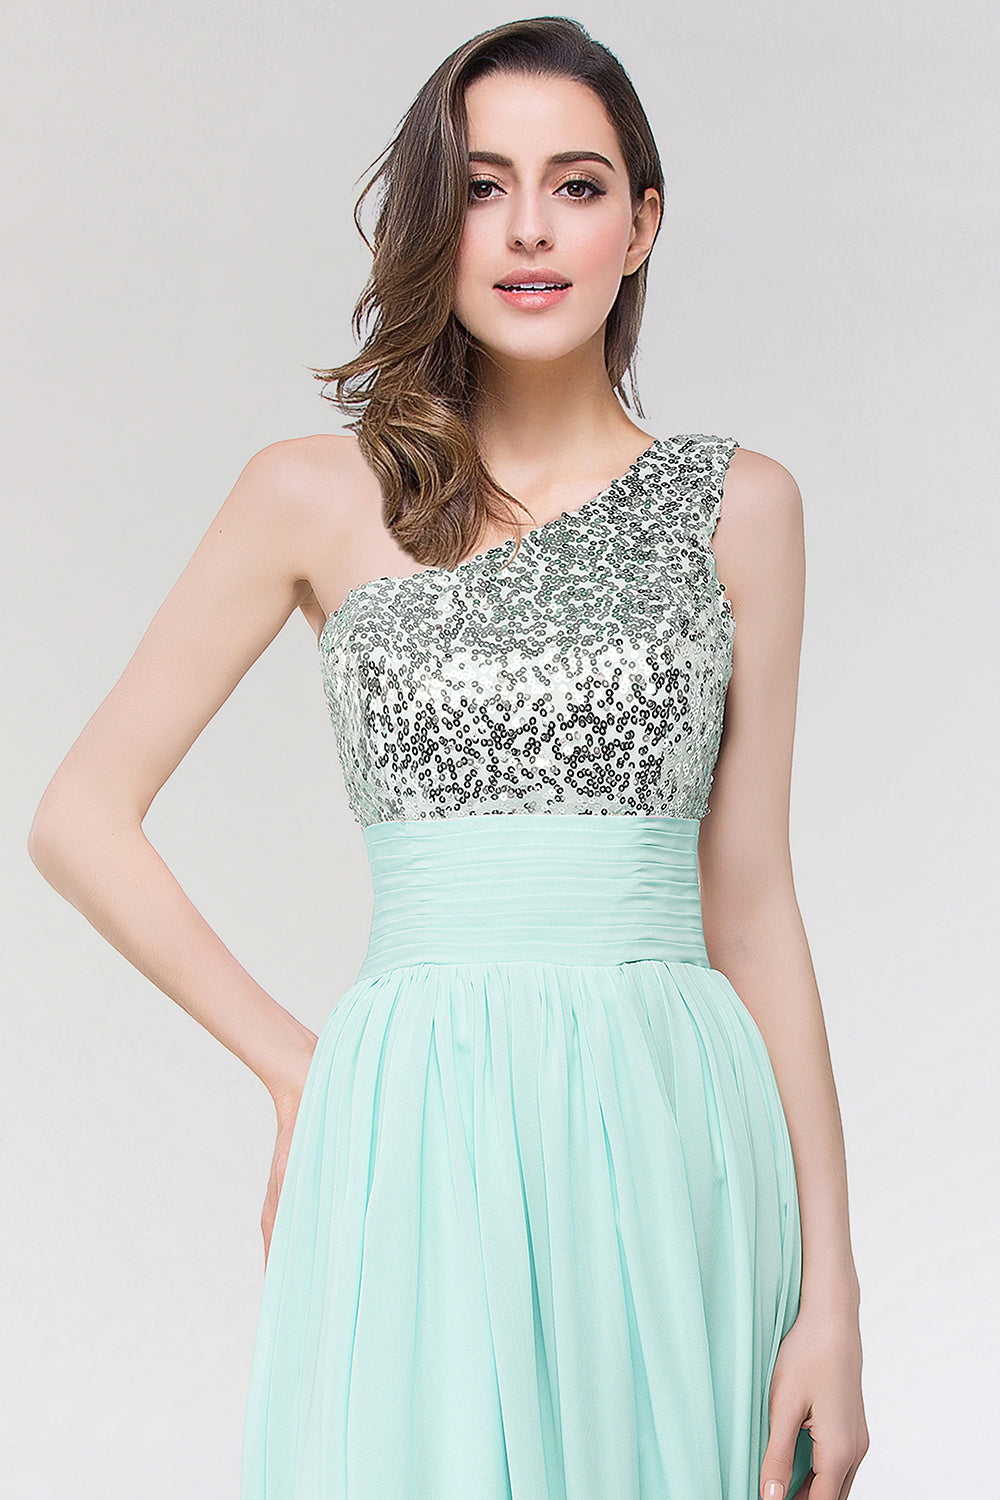 Sparkly One-shoulder Ruffle Long Bridesmaid Dresses with Sequined Top